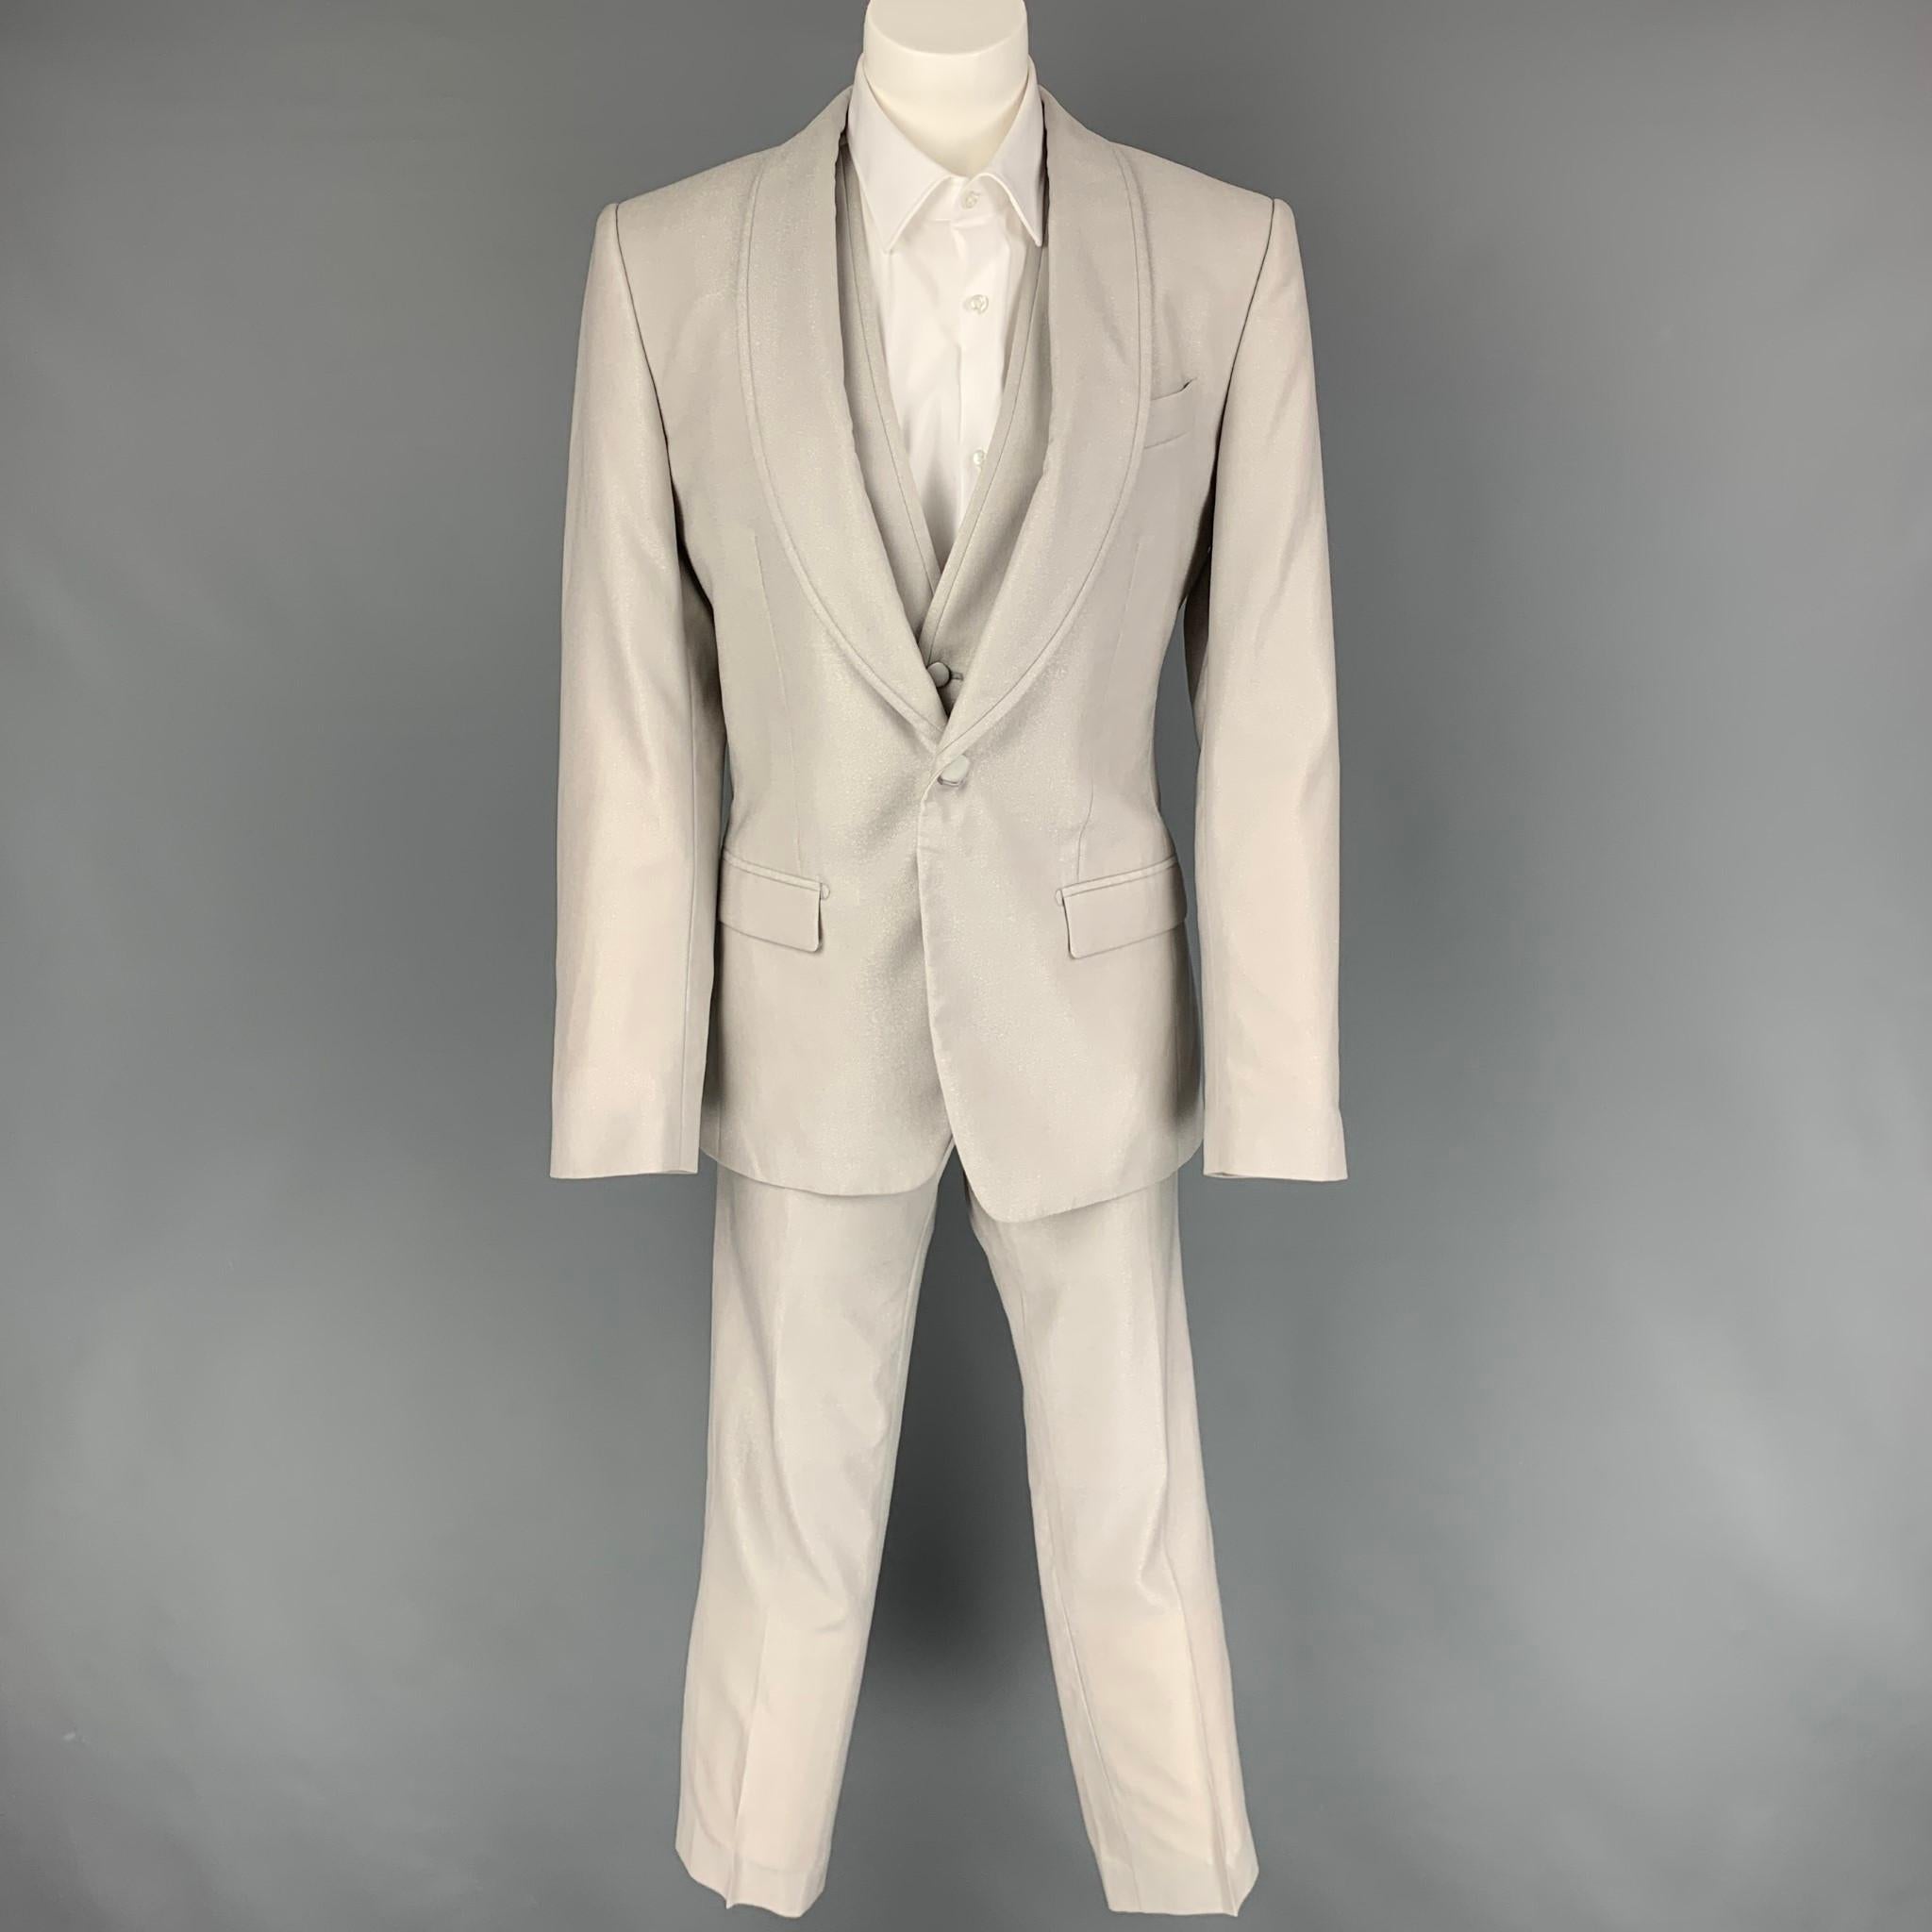 DOLCE & GABBANA 3 Piece suit comes in a grey wool / silk with a full liner and includes a single breasted,  single button sport coat with a shawl collar and a matching vest and flat front trousers. Made in Italy.

Very Good Pre-Owned Condition.